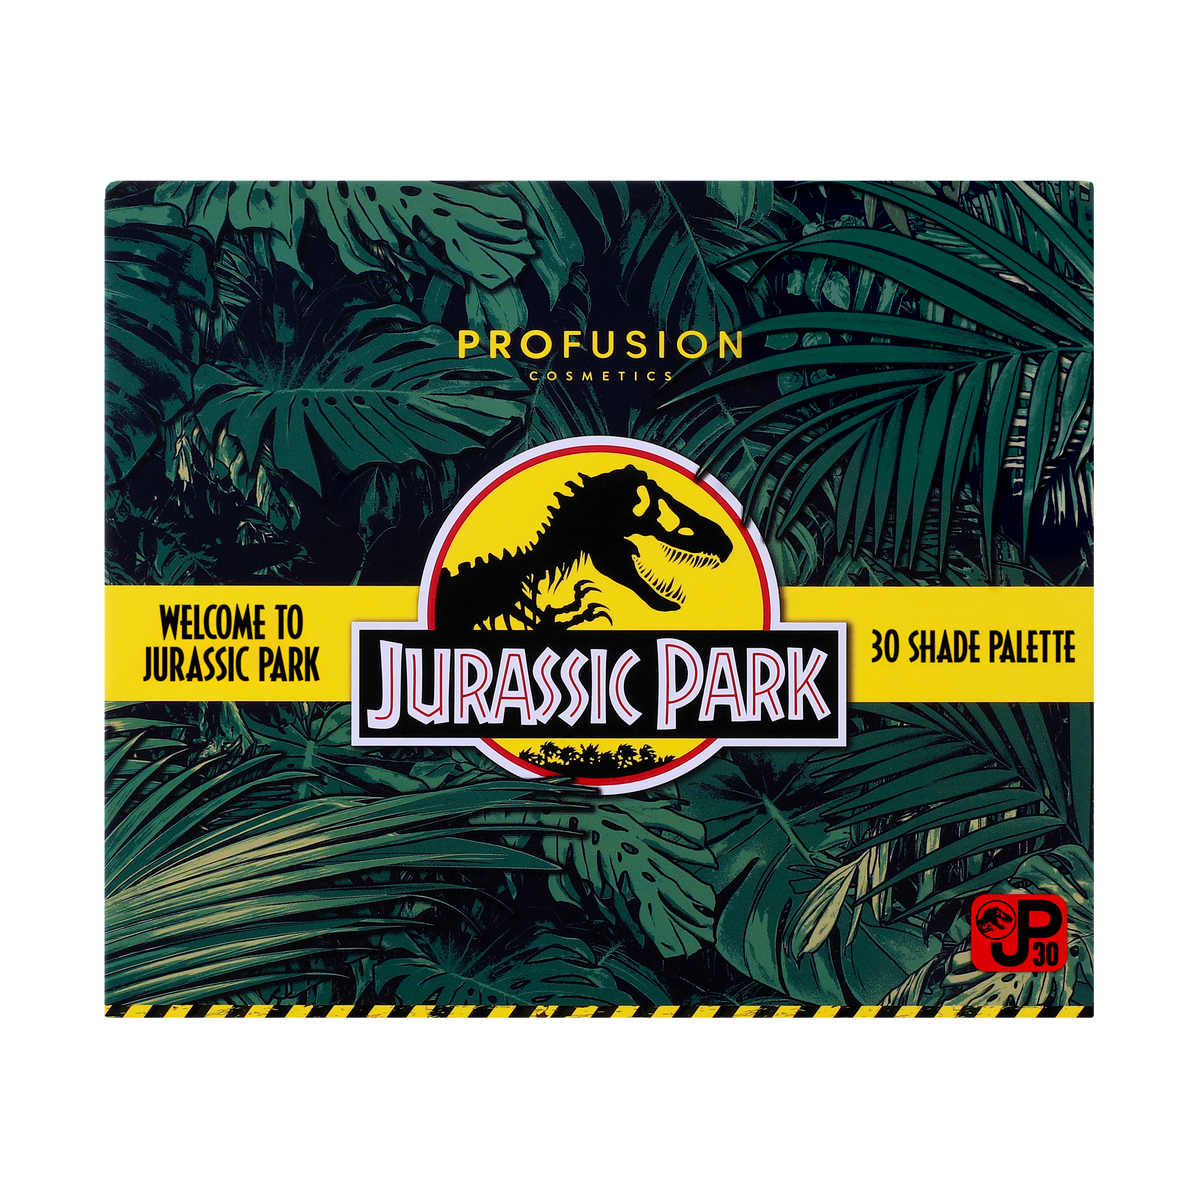 Front cover of the palette that says &quot; Welcome to Jurassic Park&quot; on the left and jurasic park logo in the middle, and the words &quot;30 shade palette&quot; on the right  